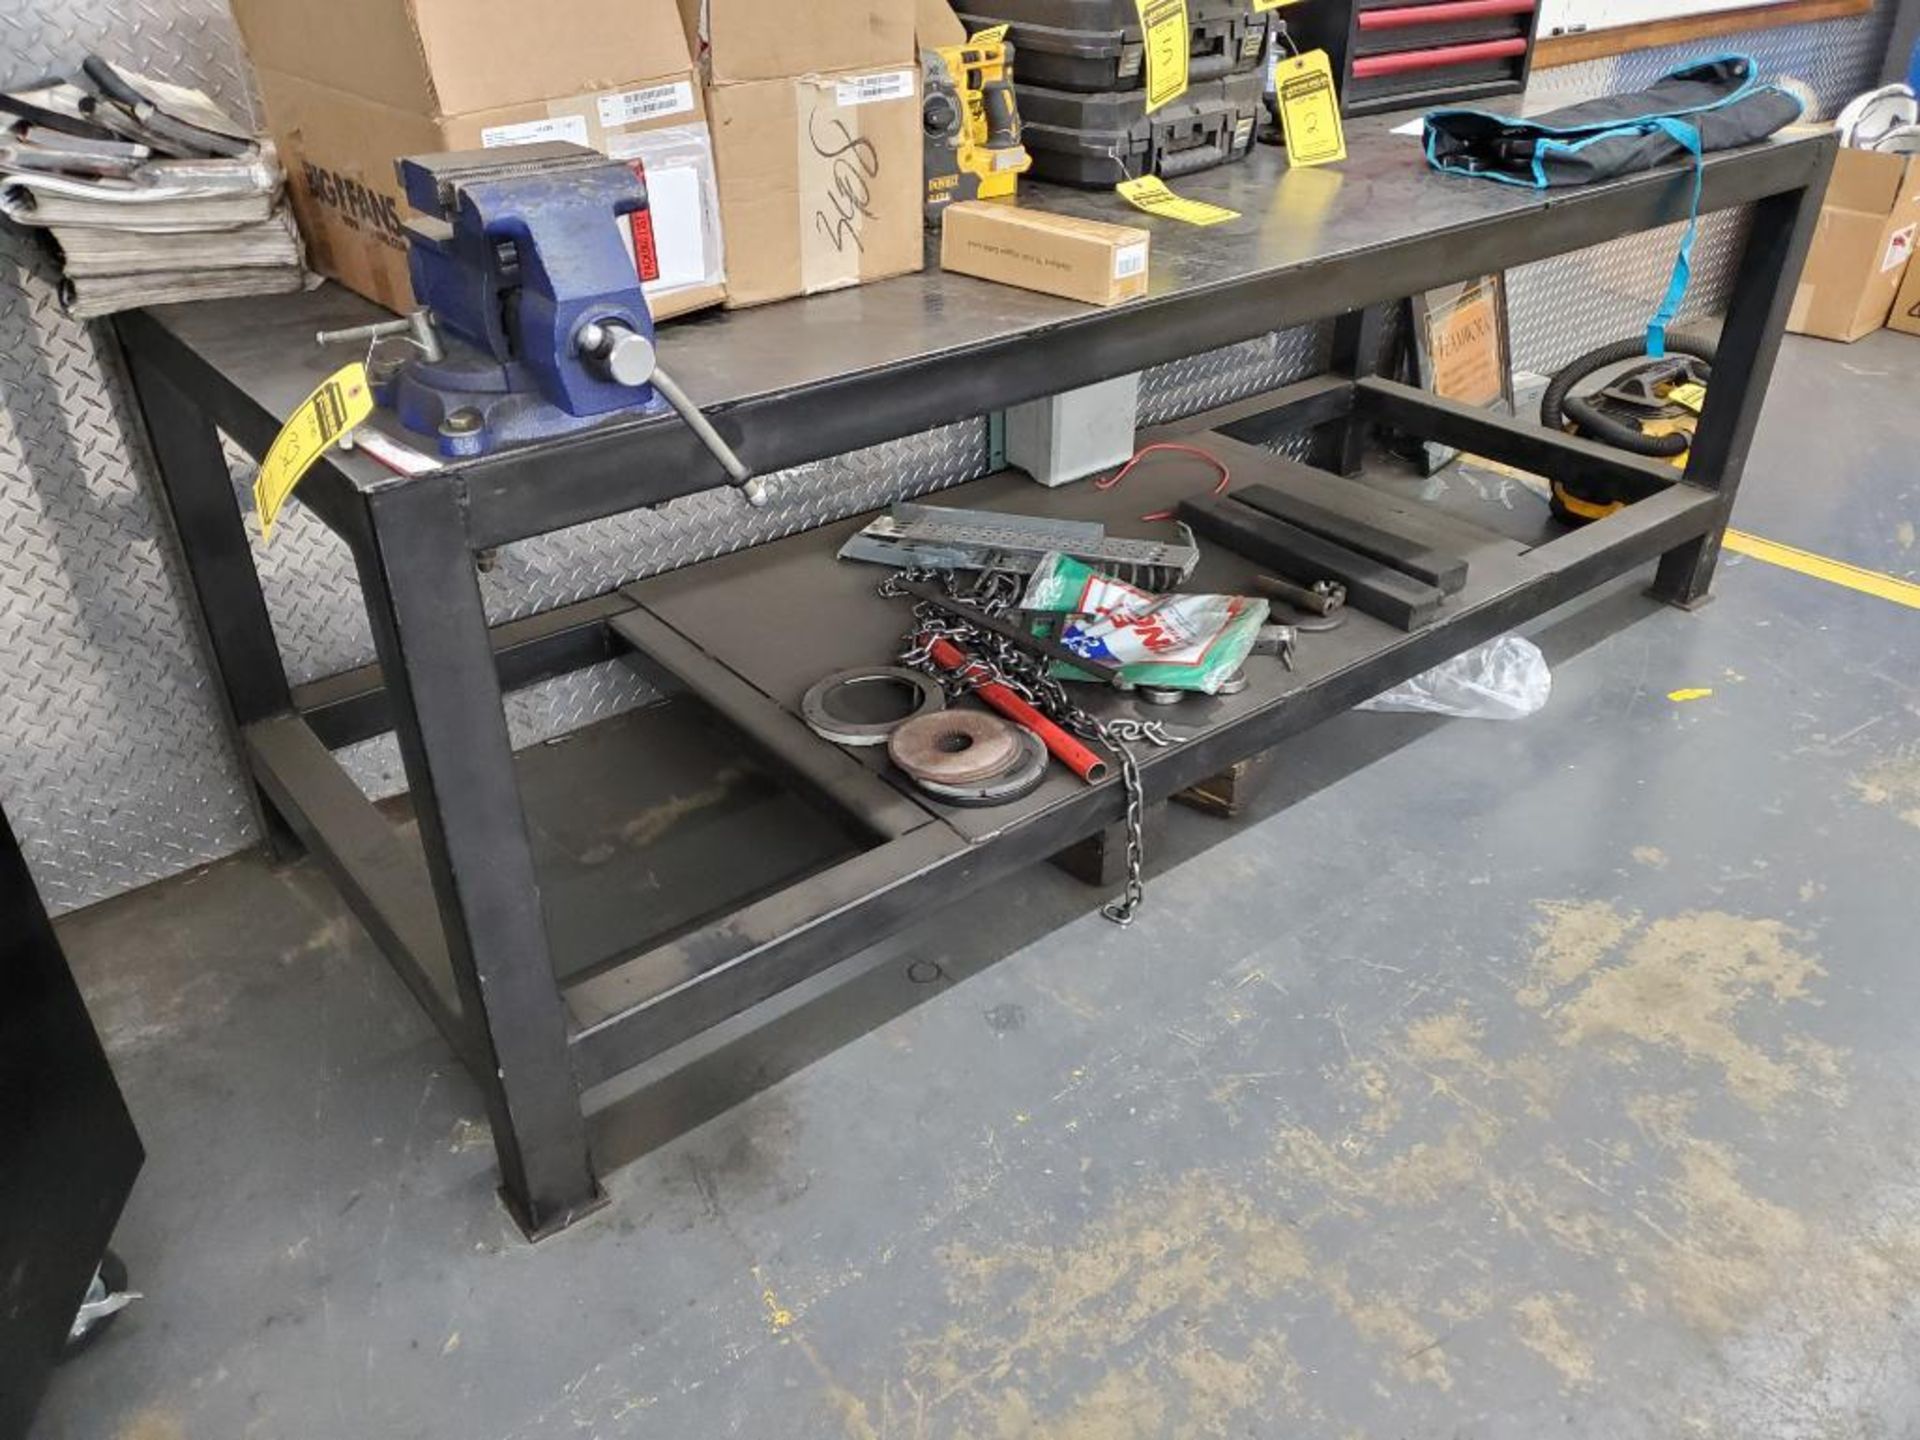 Steel Work Table w/ 5-1/2" Bench Vise - Image 2 of 6